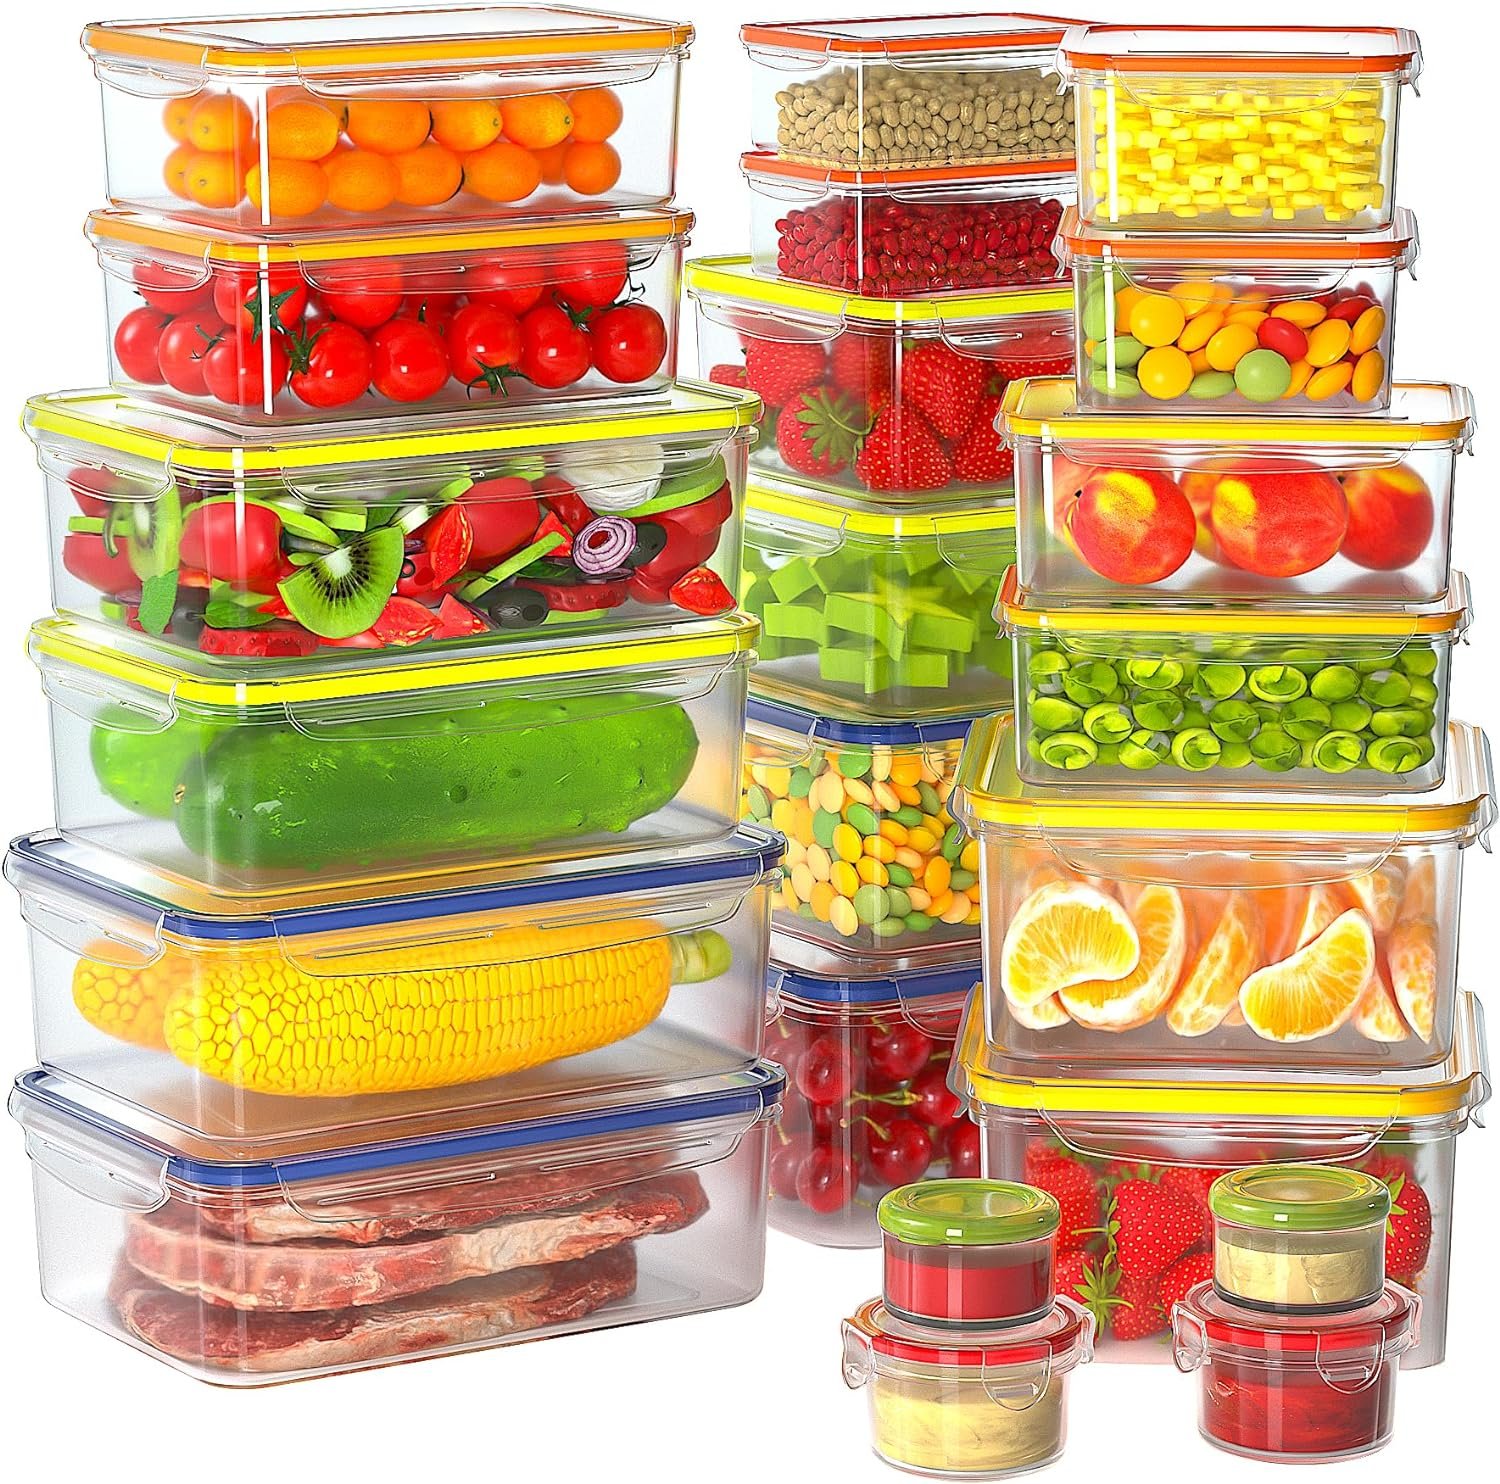 44 PCS Food Storage Containers Review